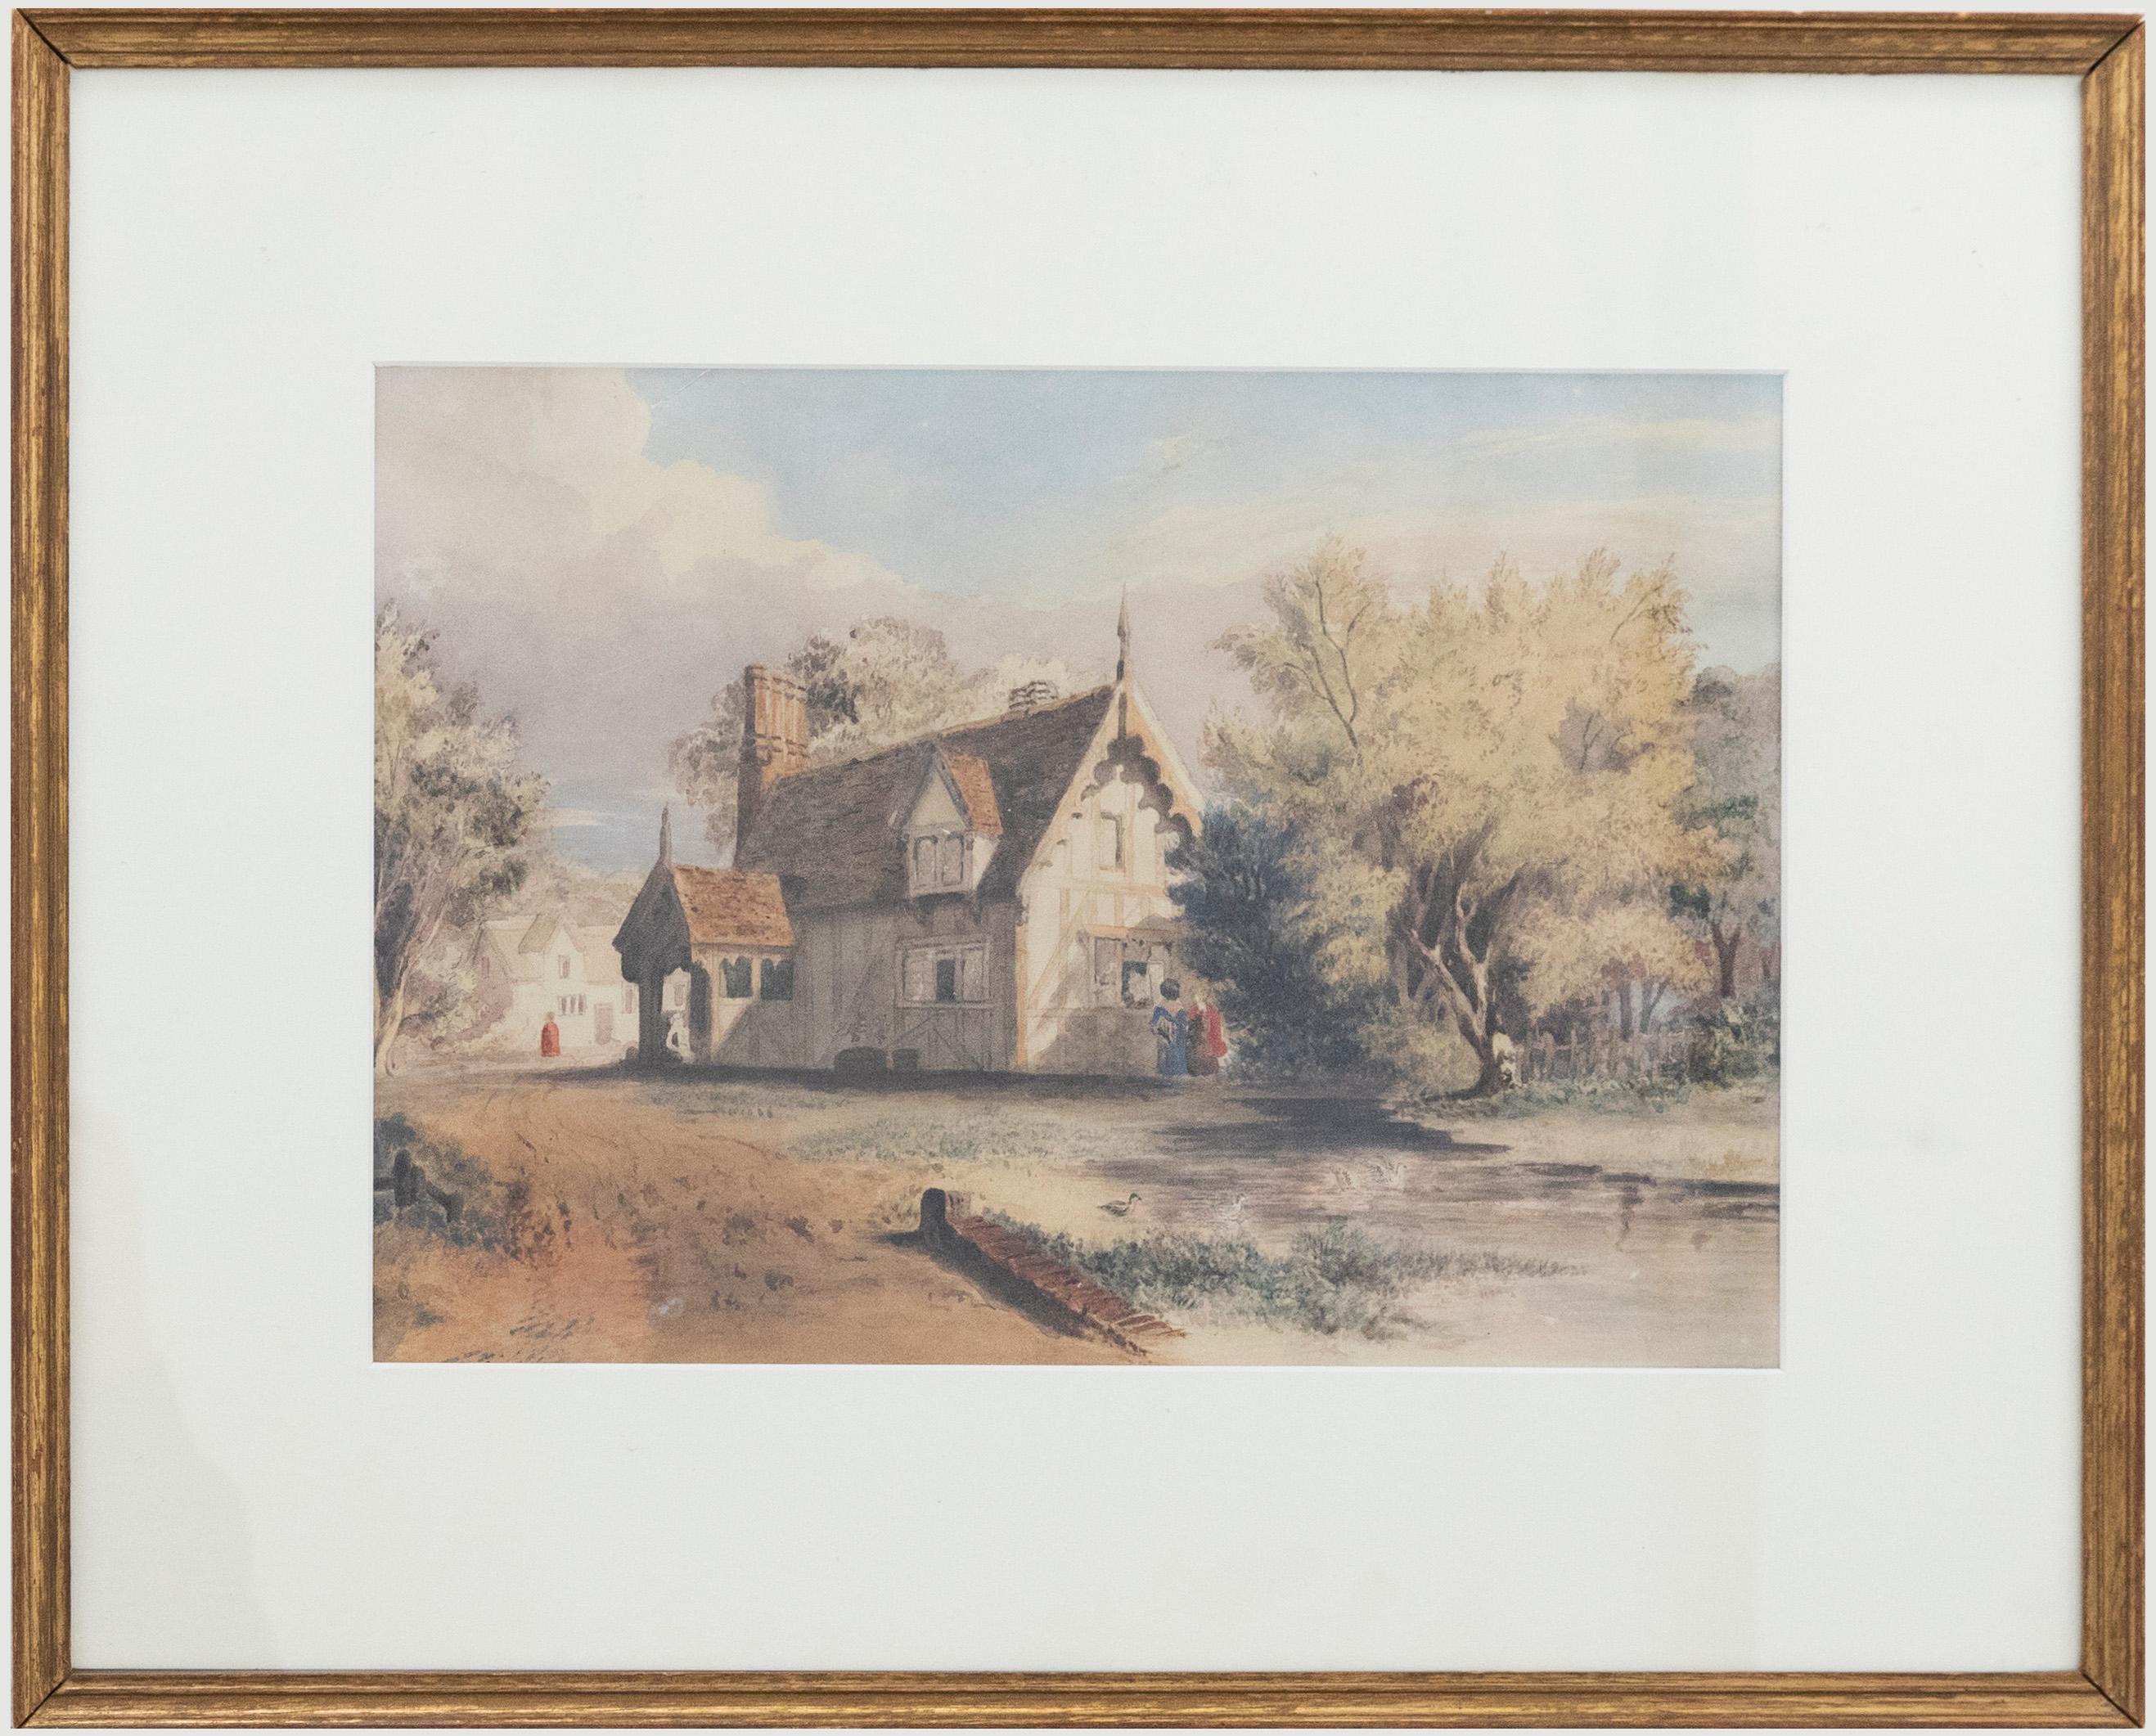 Unknown Landscape Art - Late 19th Century Watercolour - Stopping by the Cottage